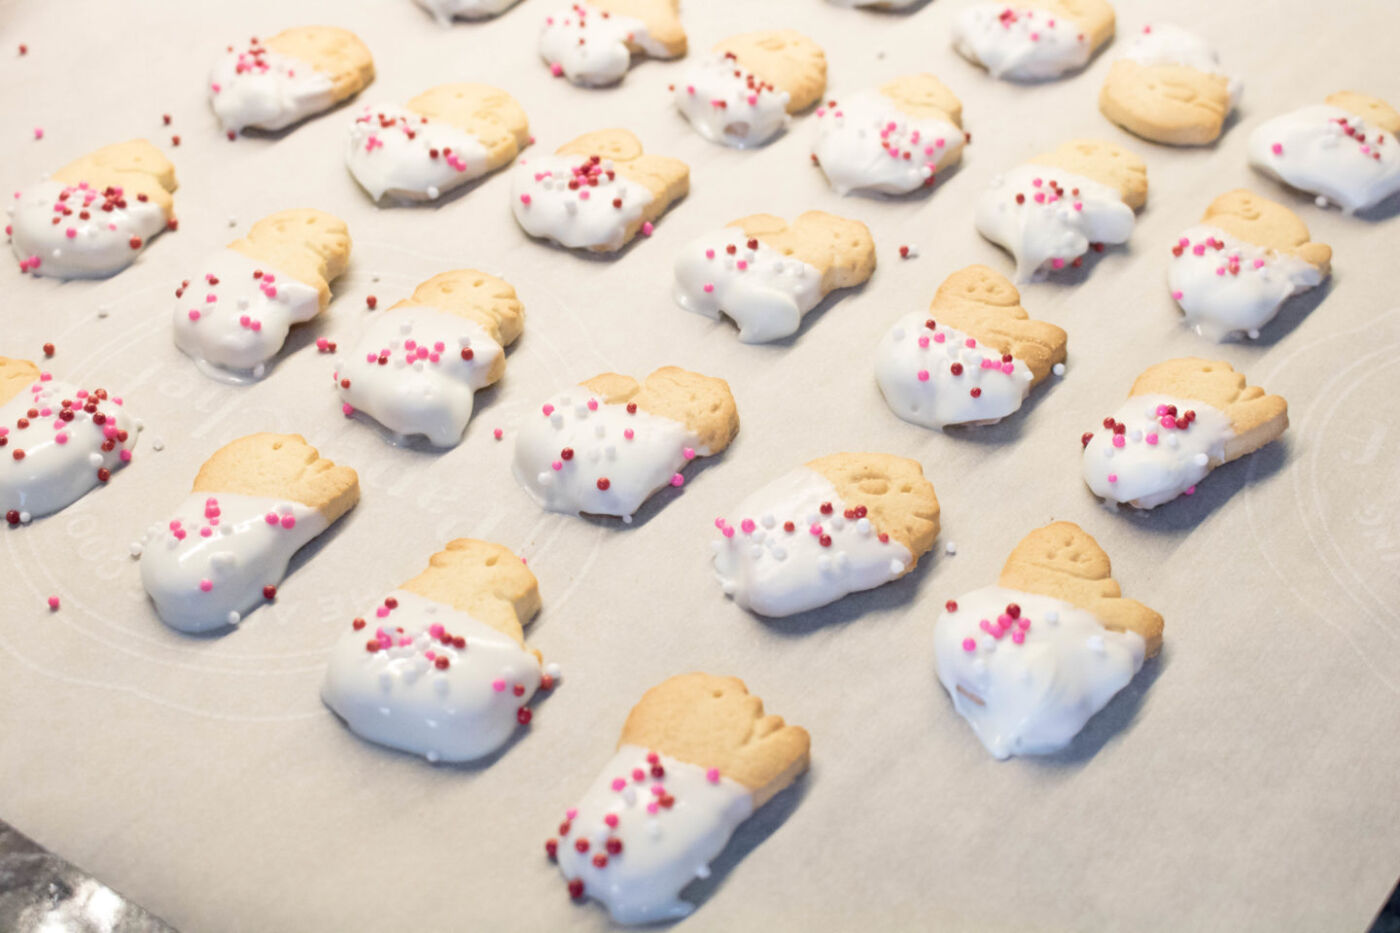 chocolate-dipped animal crackers for valentine's day treats